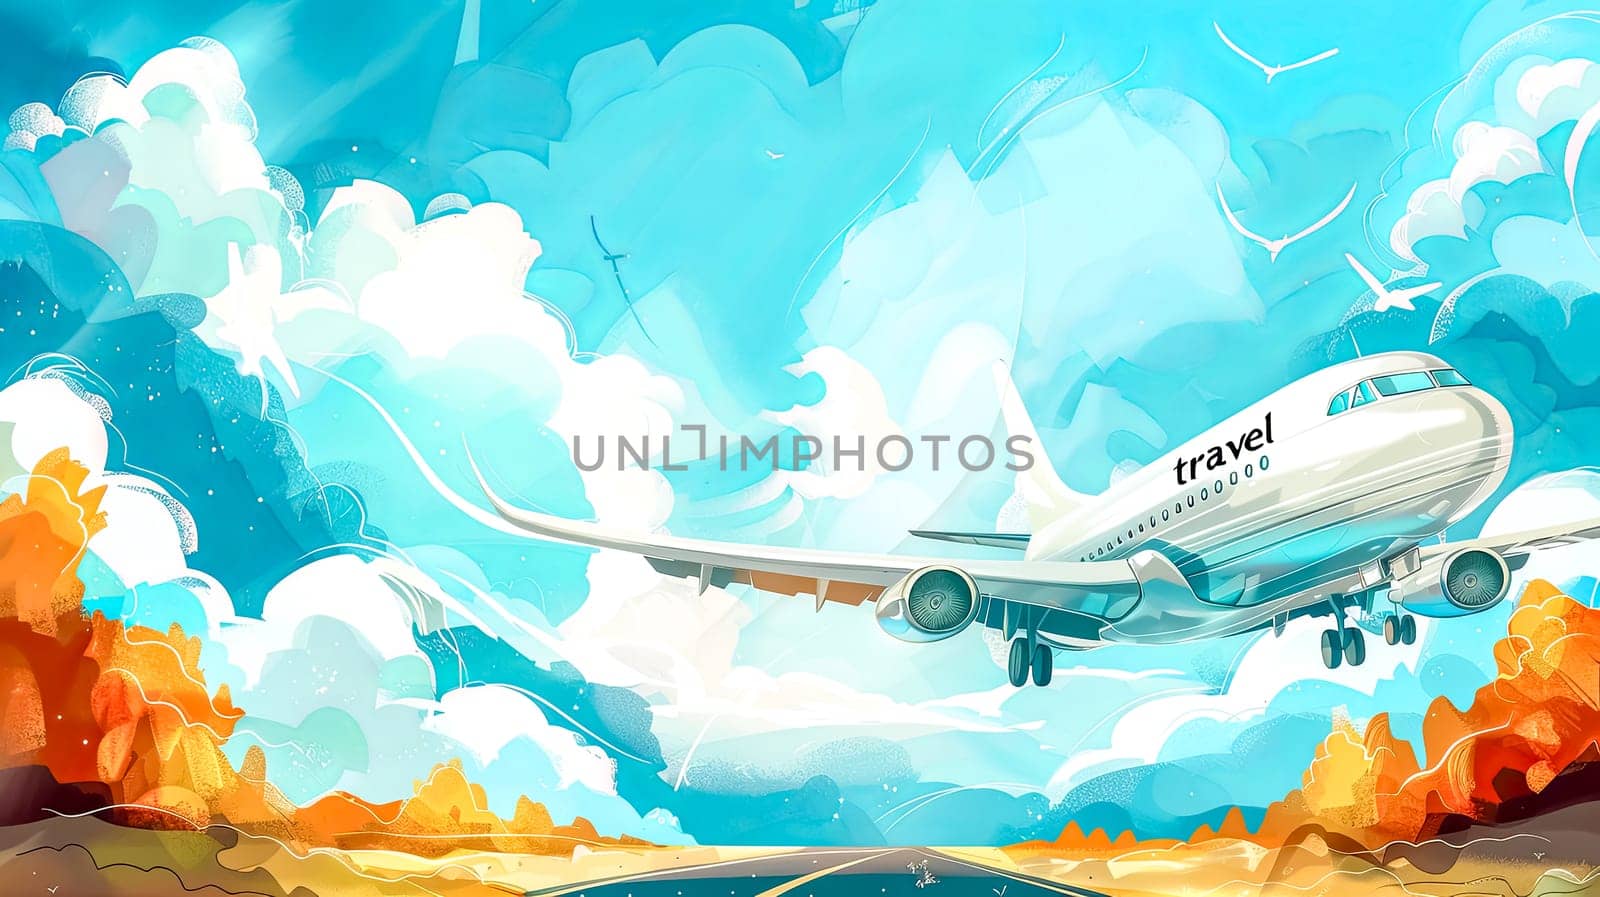 Sunny skies and air travel adventure by Edophoto